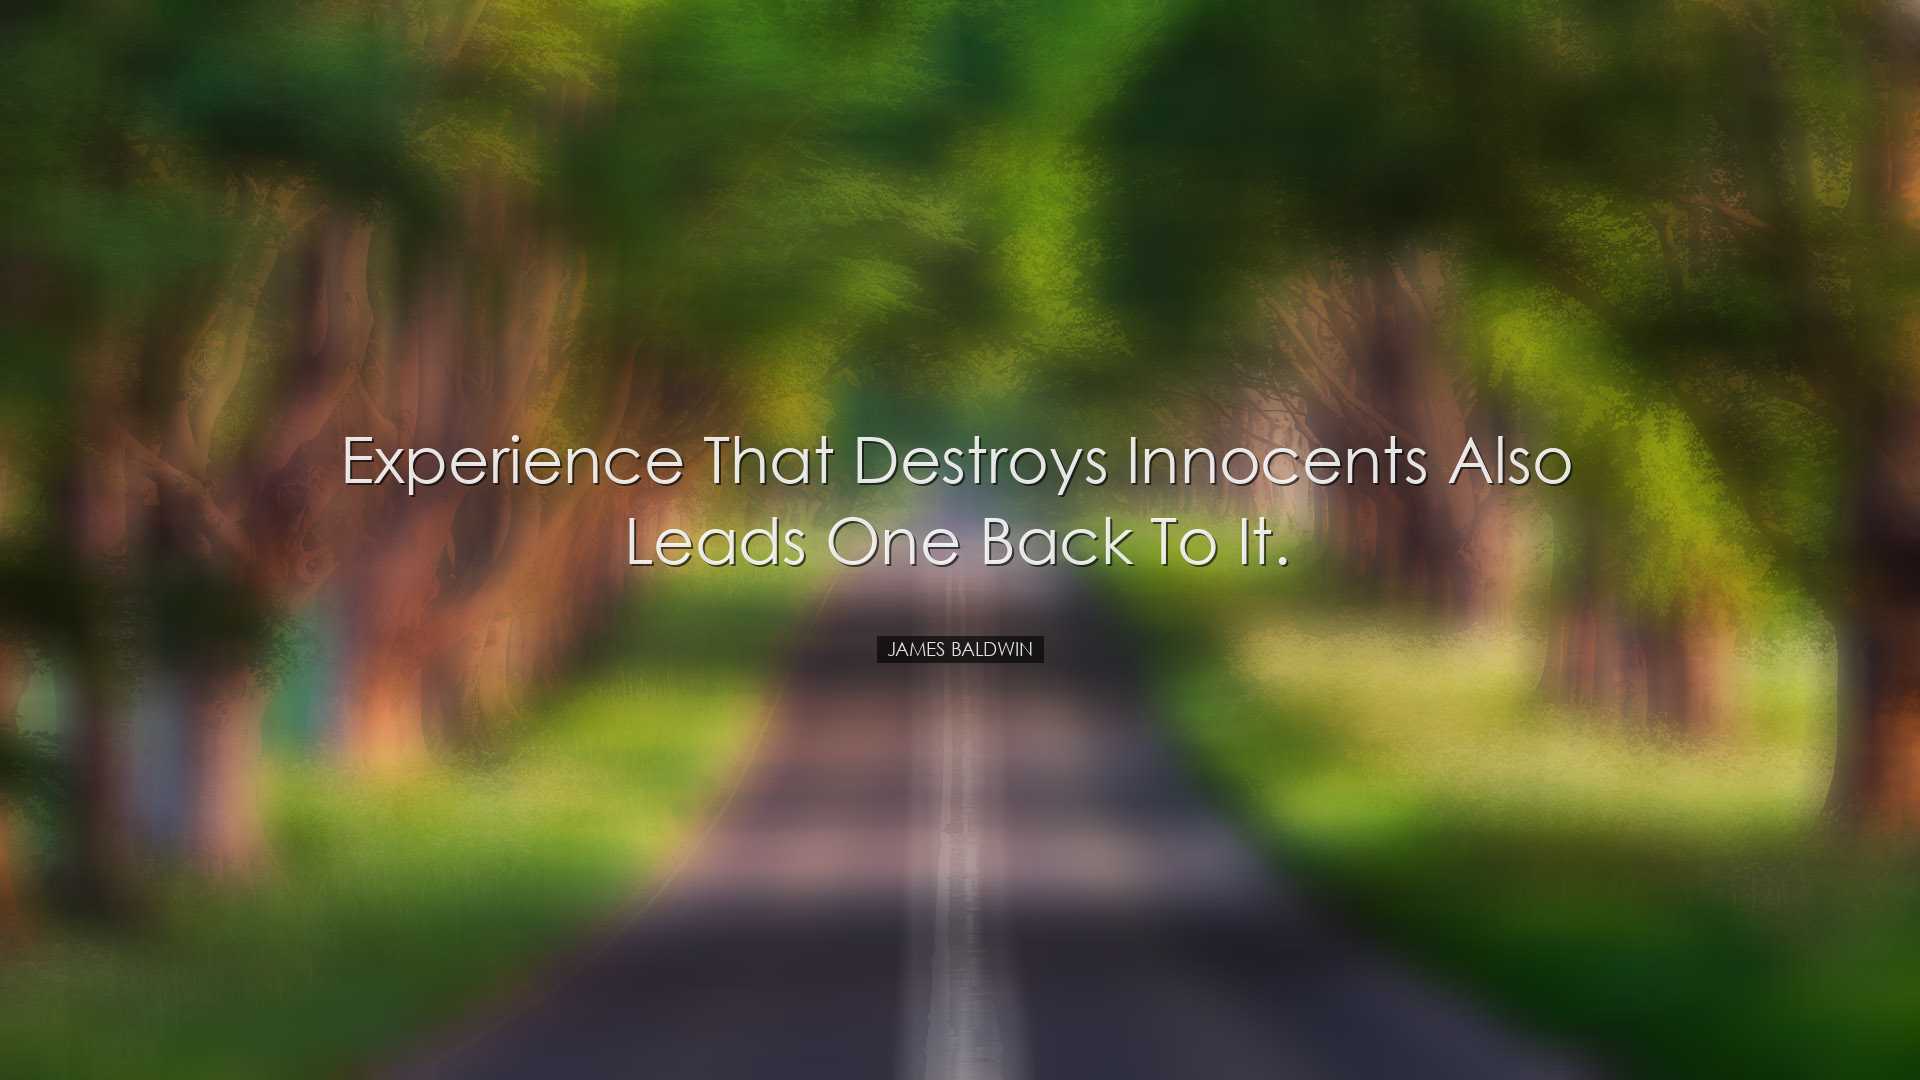 Experience that destroys innocents also leads one back to it. - Ja